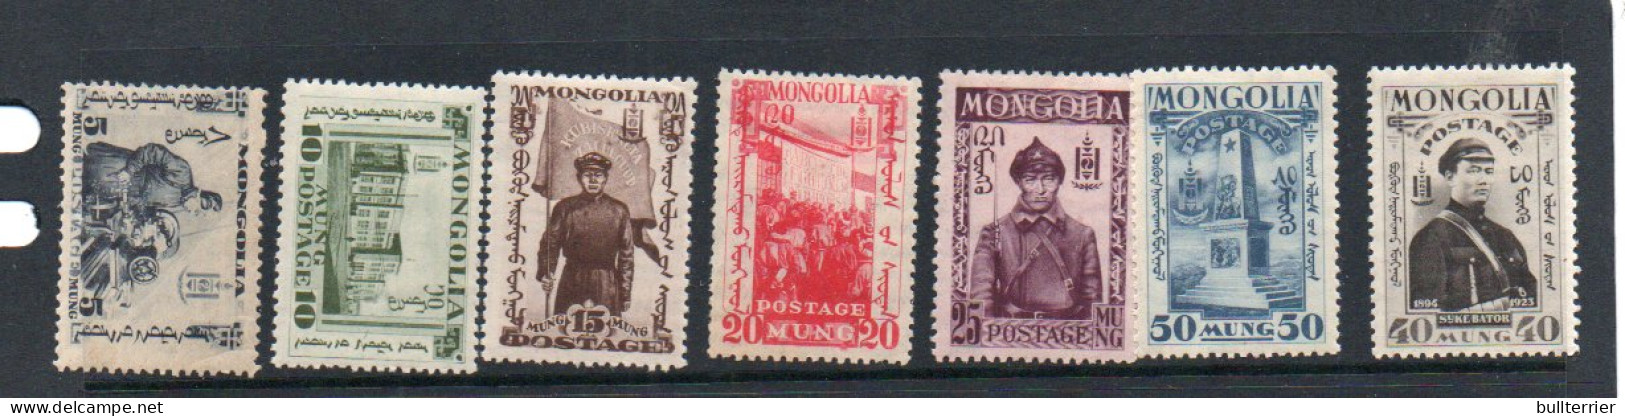 MONGOLIA - 1932 -  5MON TO 50MON MINT HINGED - VERY FINE, SELDOM OFFERED SET ,SG £22 - Mongolië